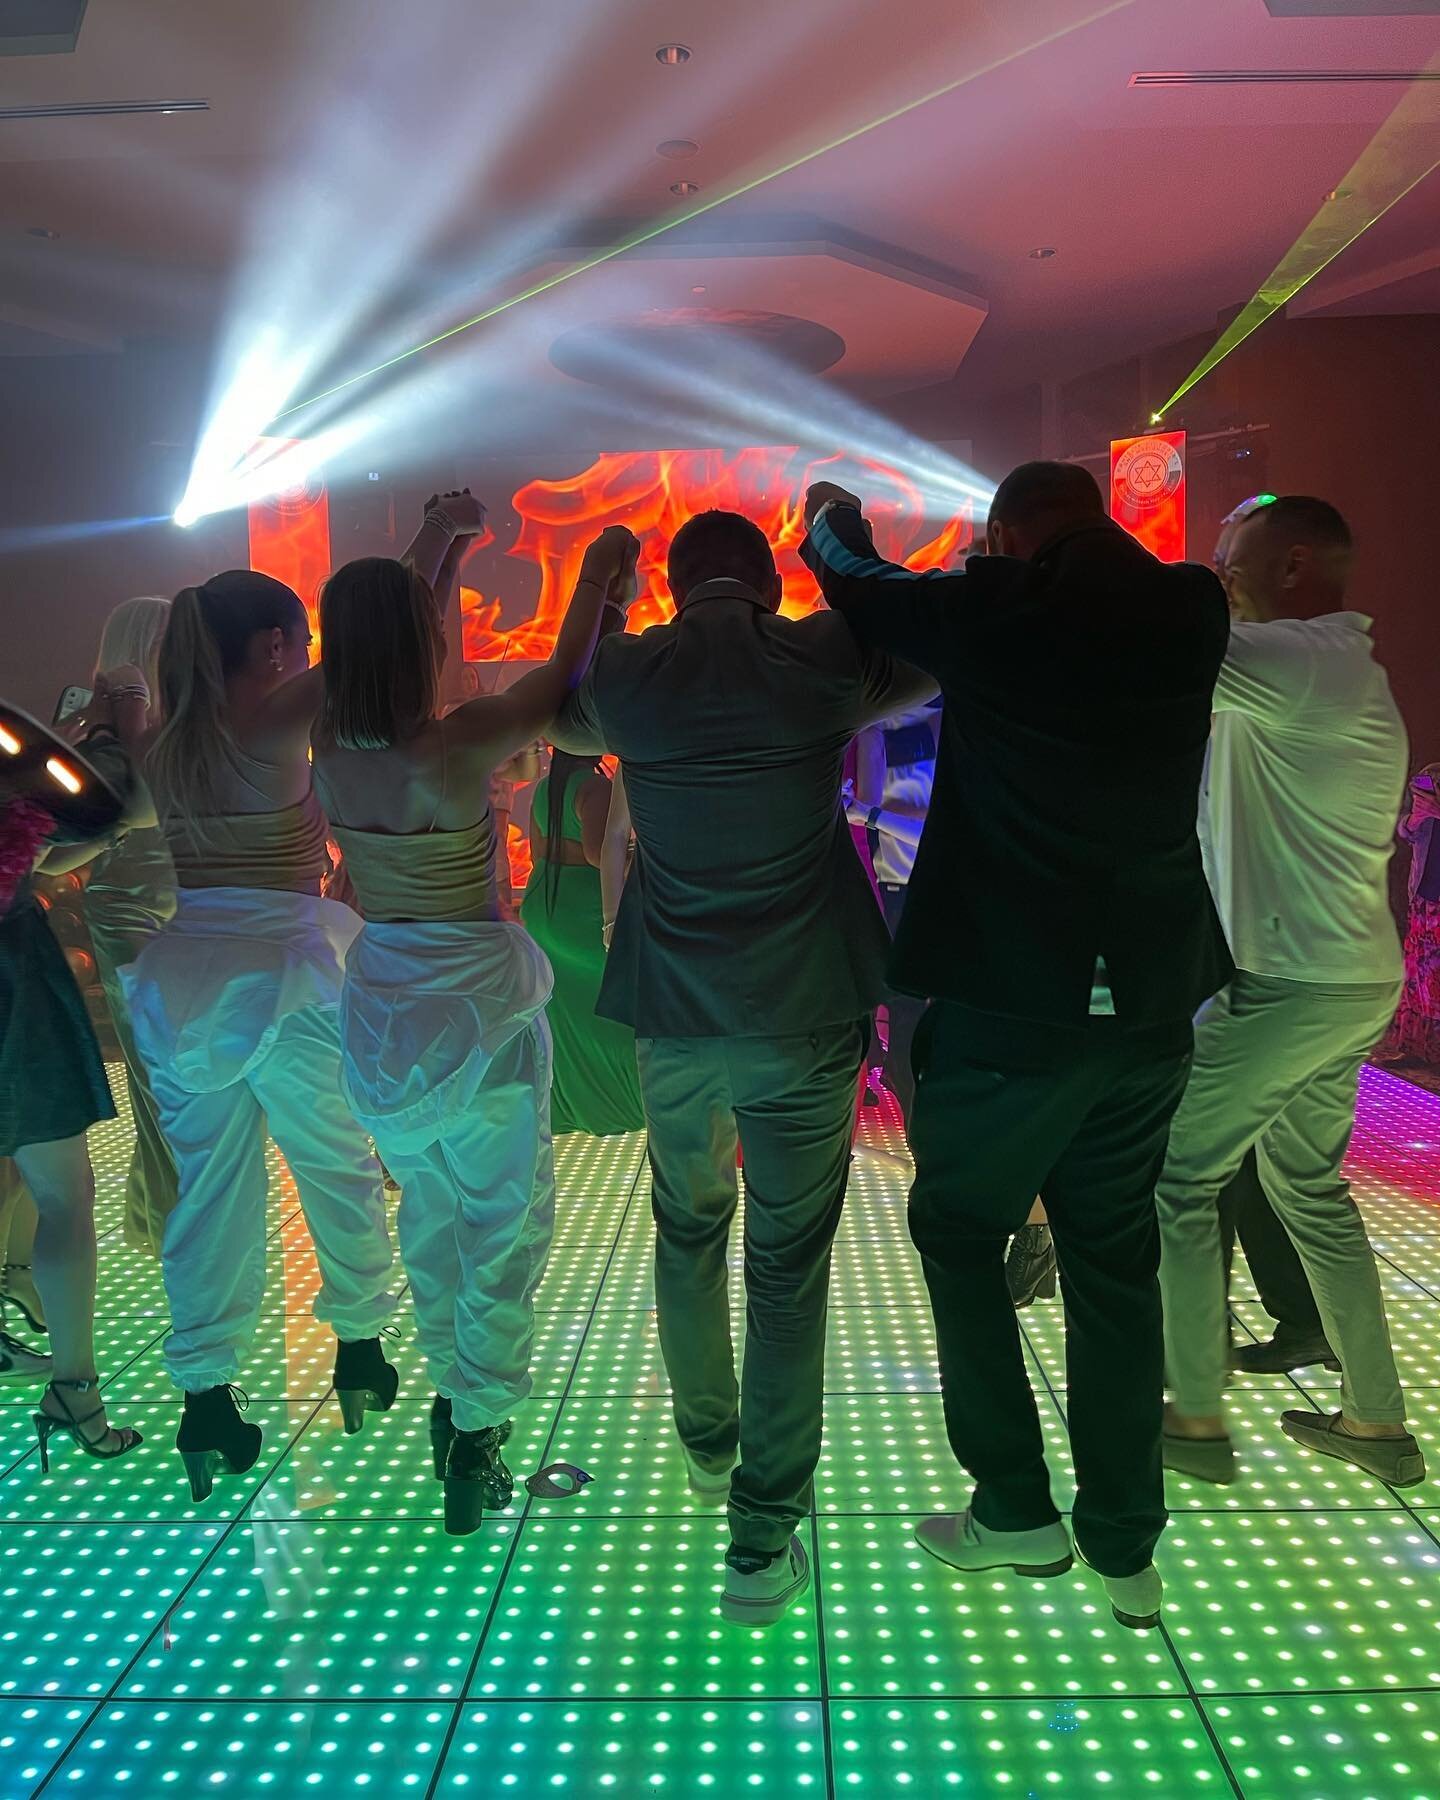 Such a fun time at Daniel, Victoria &amp; Marianna Bar/Bat Mitzvah. Honored to be present and that our Dance-floor helped make this party such a huge success.